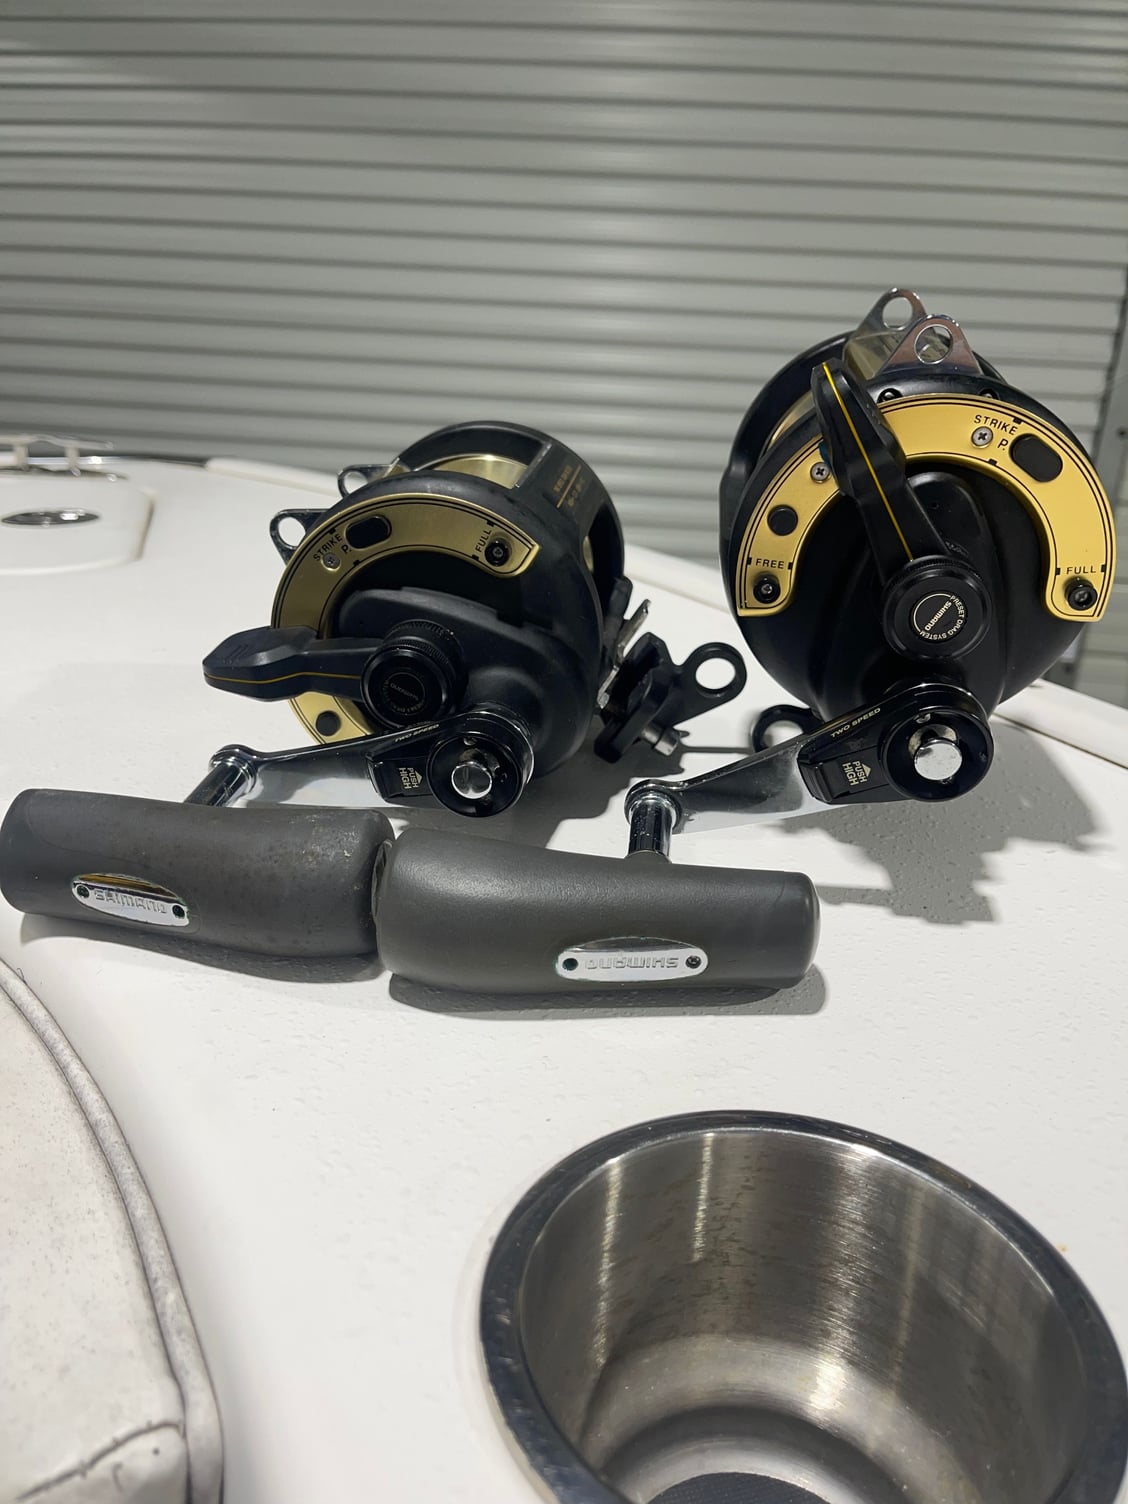 electric drill motor reel adapter TLD 50 W - The Hull Truth - Boating and  Fishing Forum